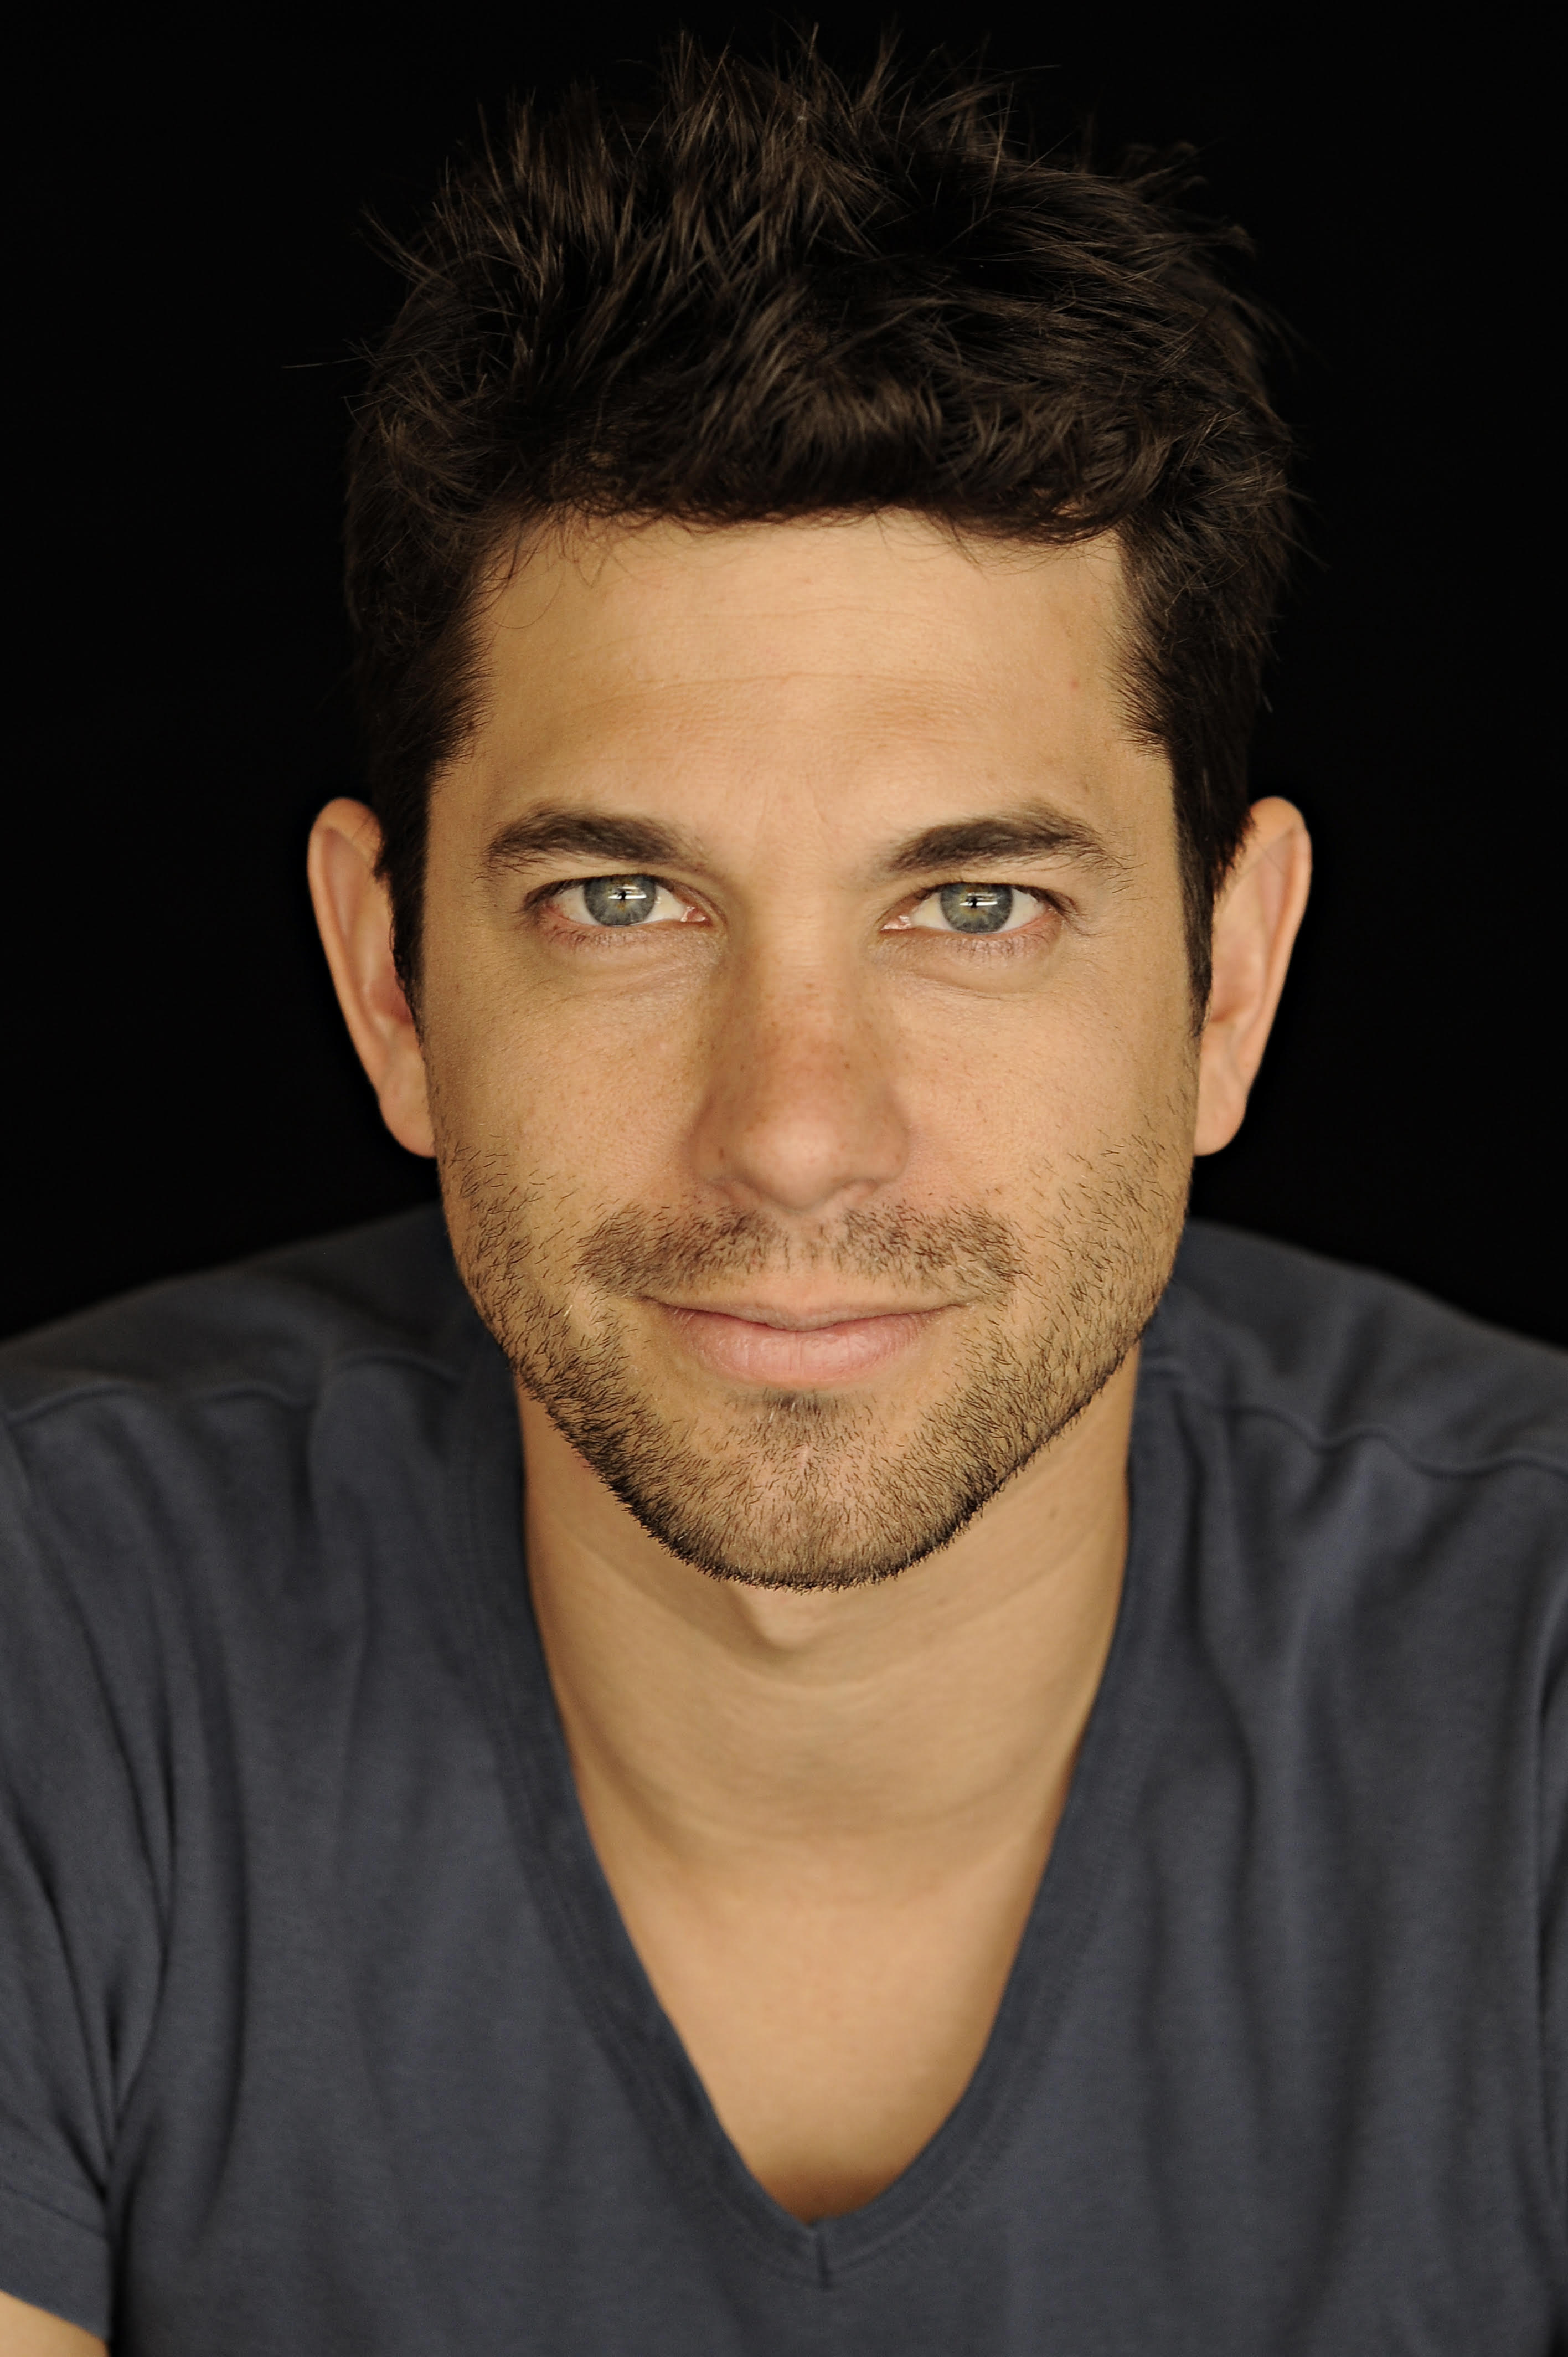 We Adam Garcia to open our Summer School Don't miss out